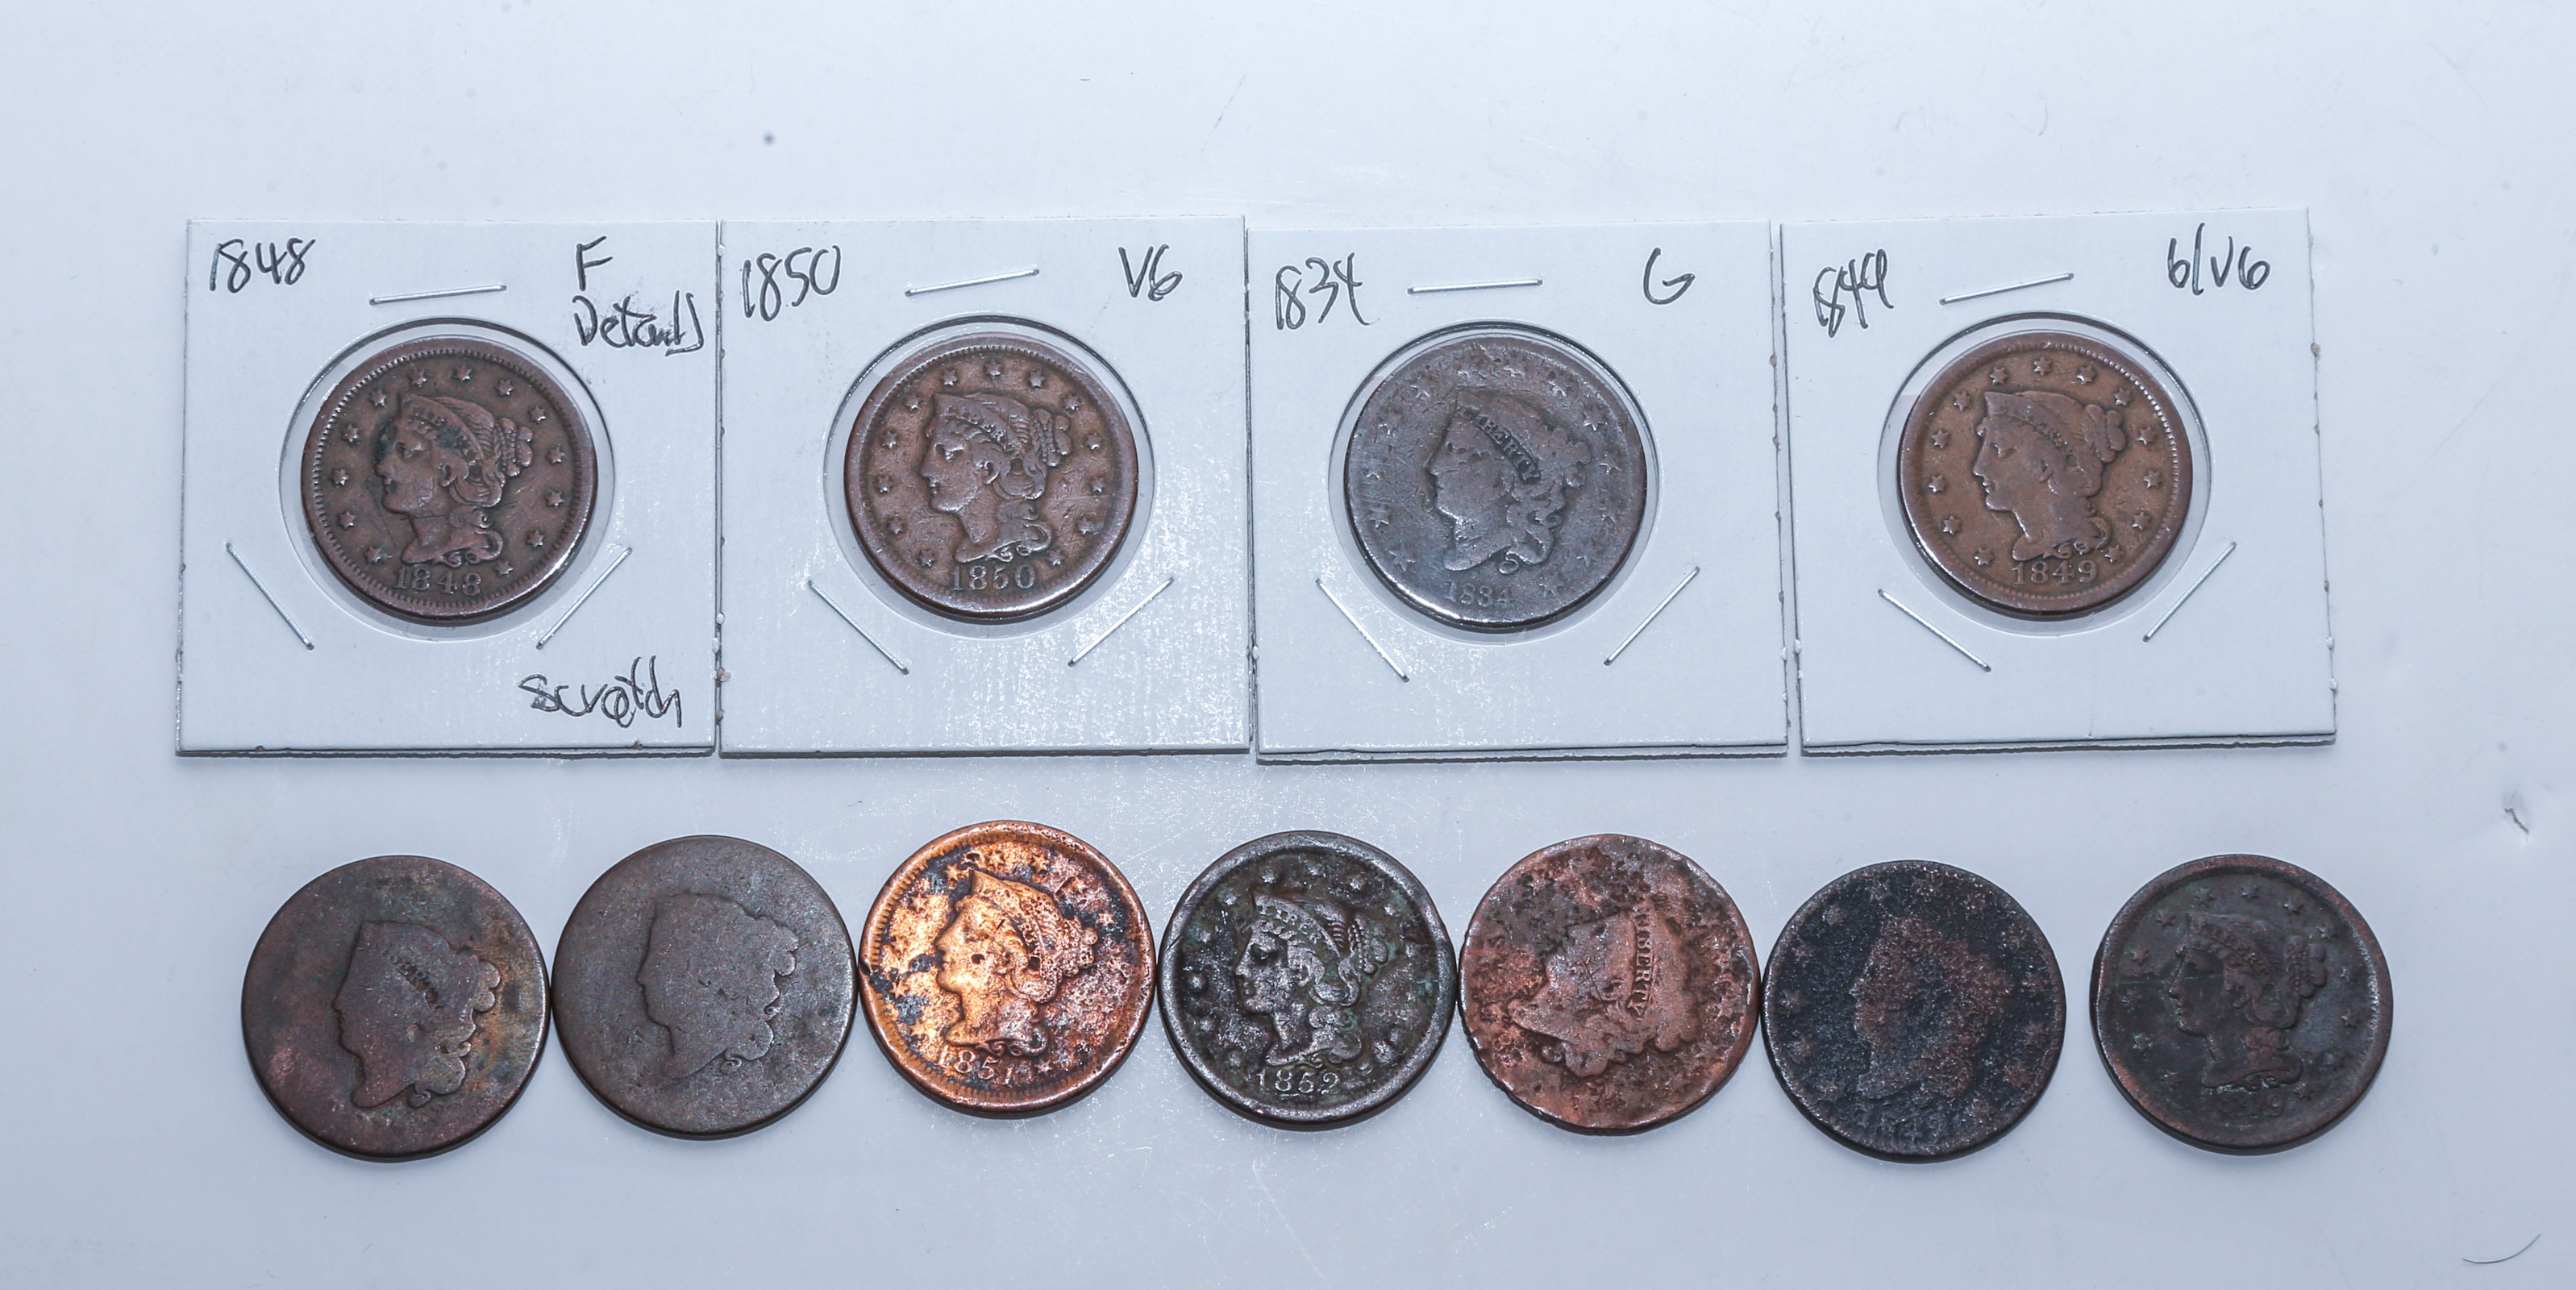 11 LARGE CENTS FOUR ARE PROBLEM 3cafa4